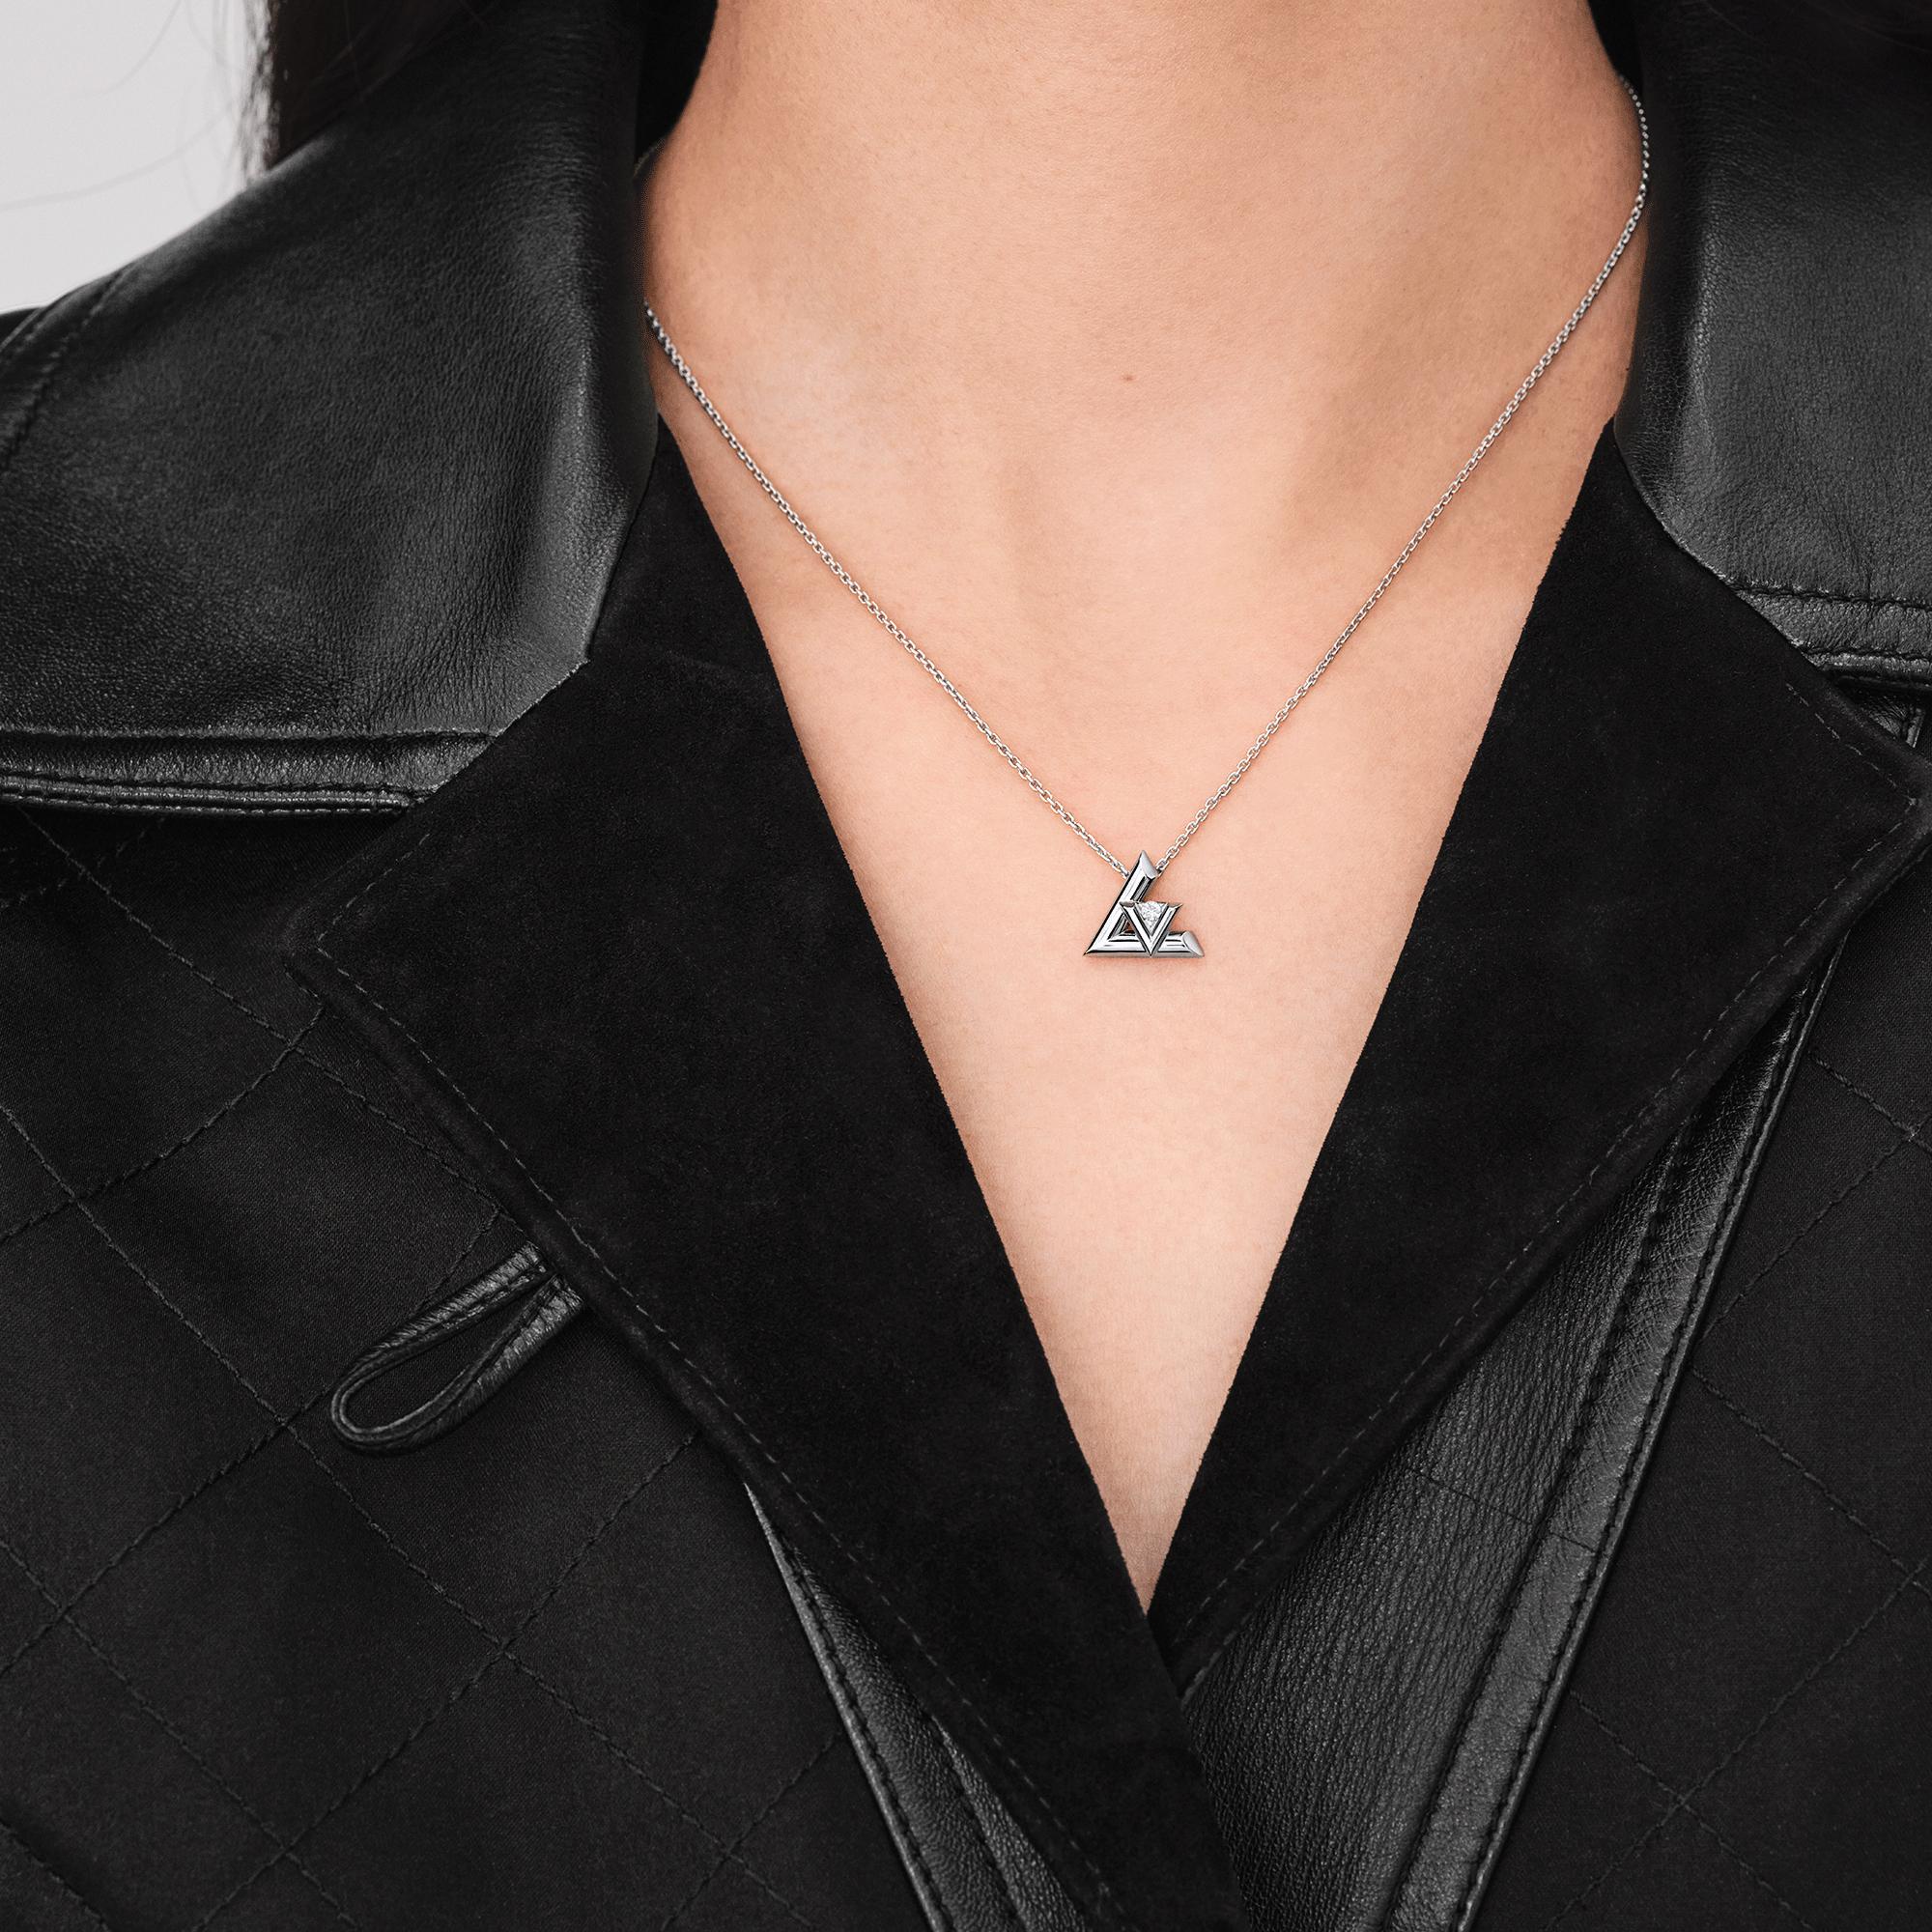 Louis Vuitton LV Volt One Small Pendant, White Gold And Diamond – Jewelry – Categories Q93806